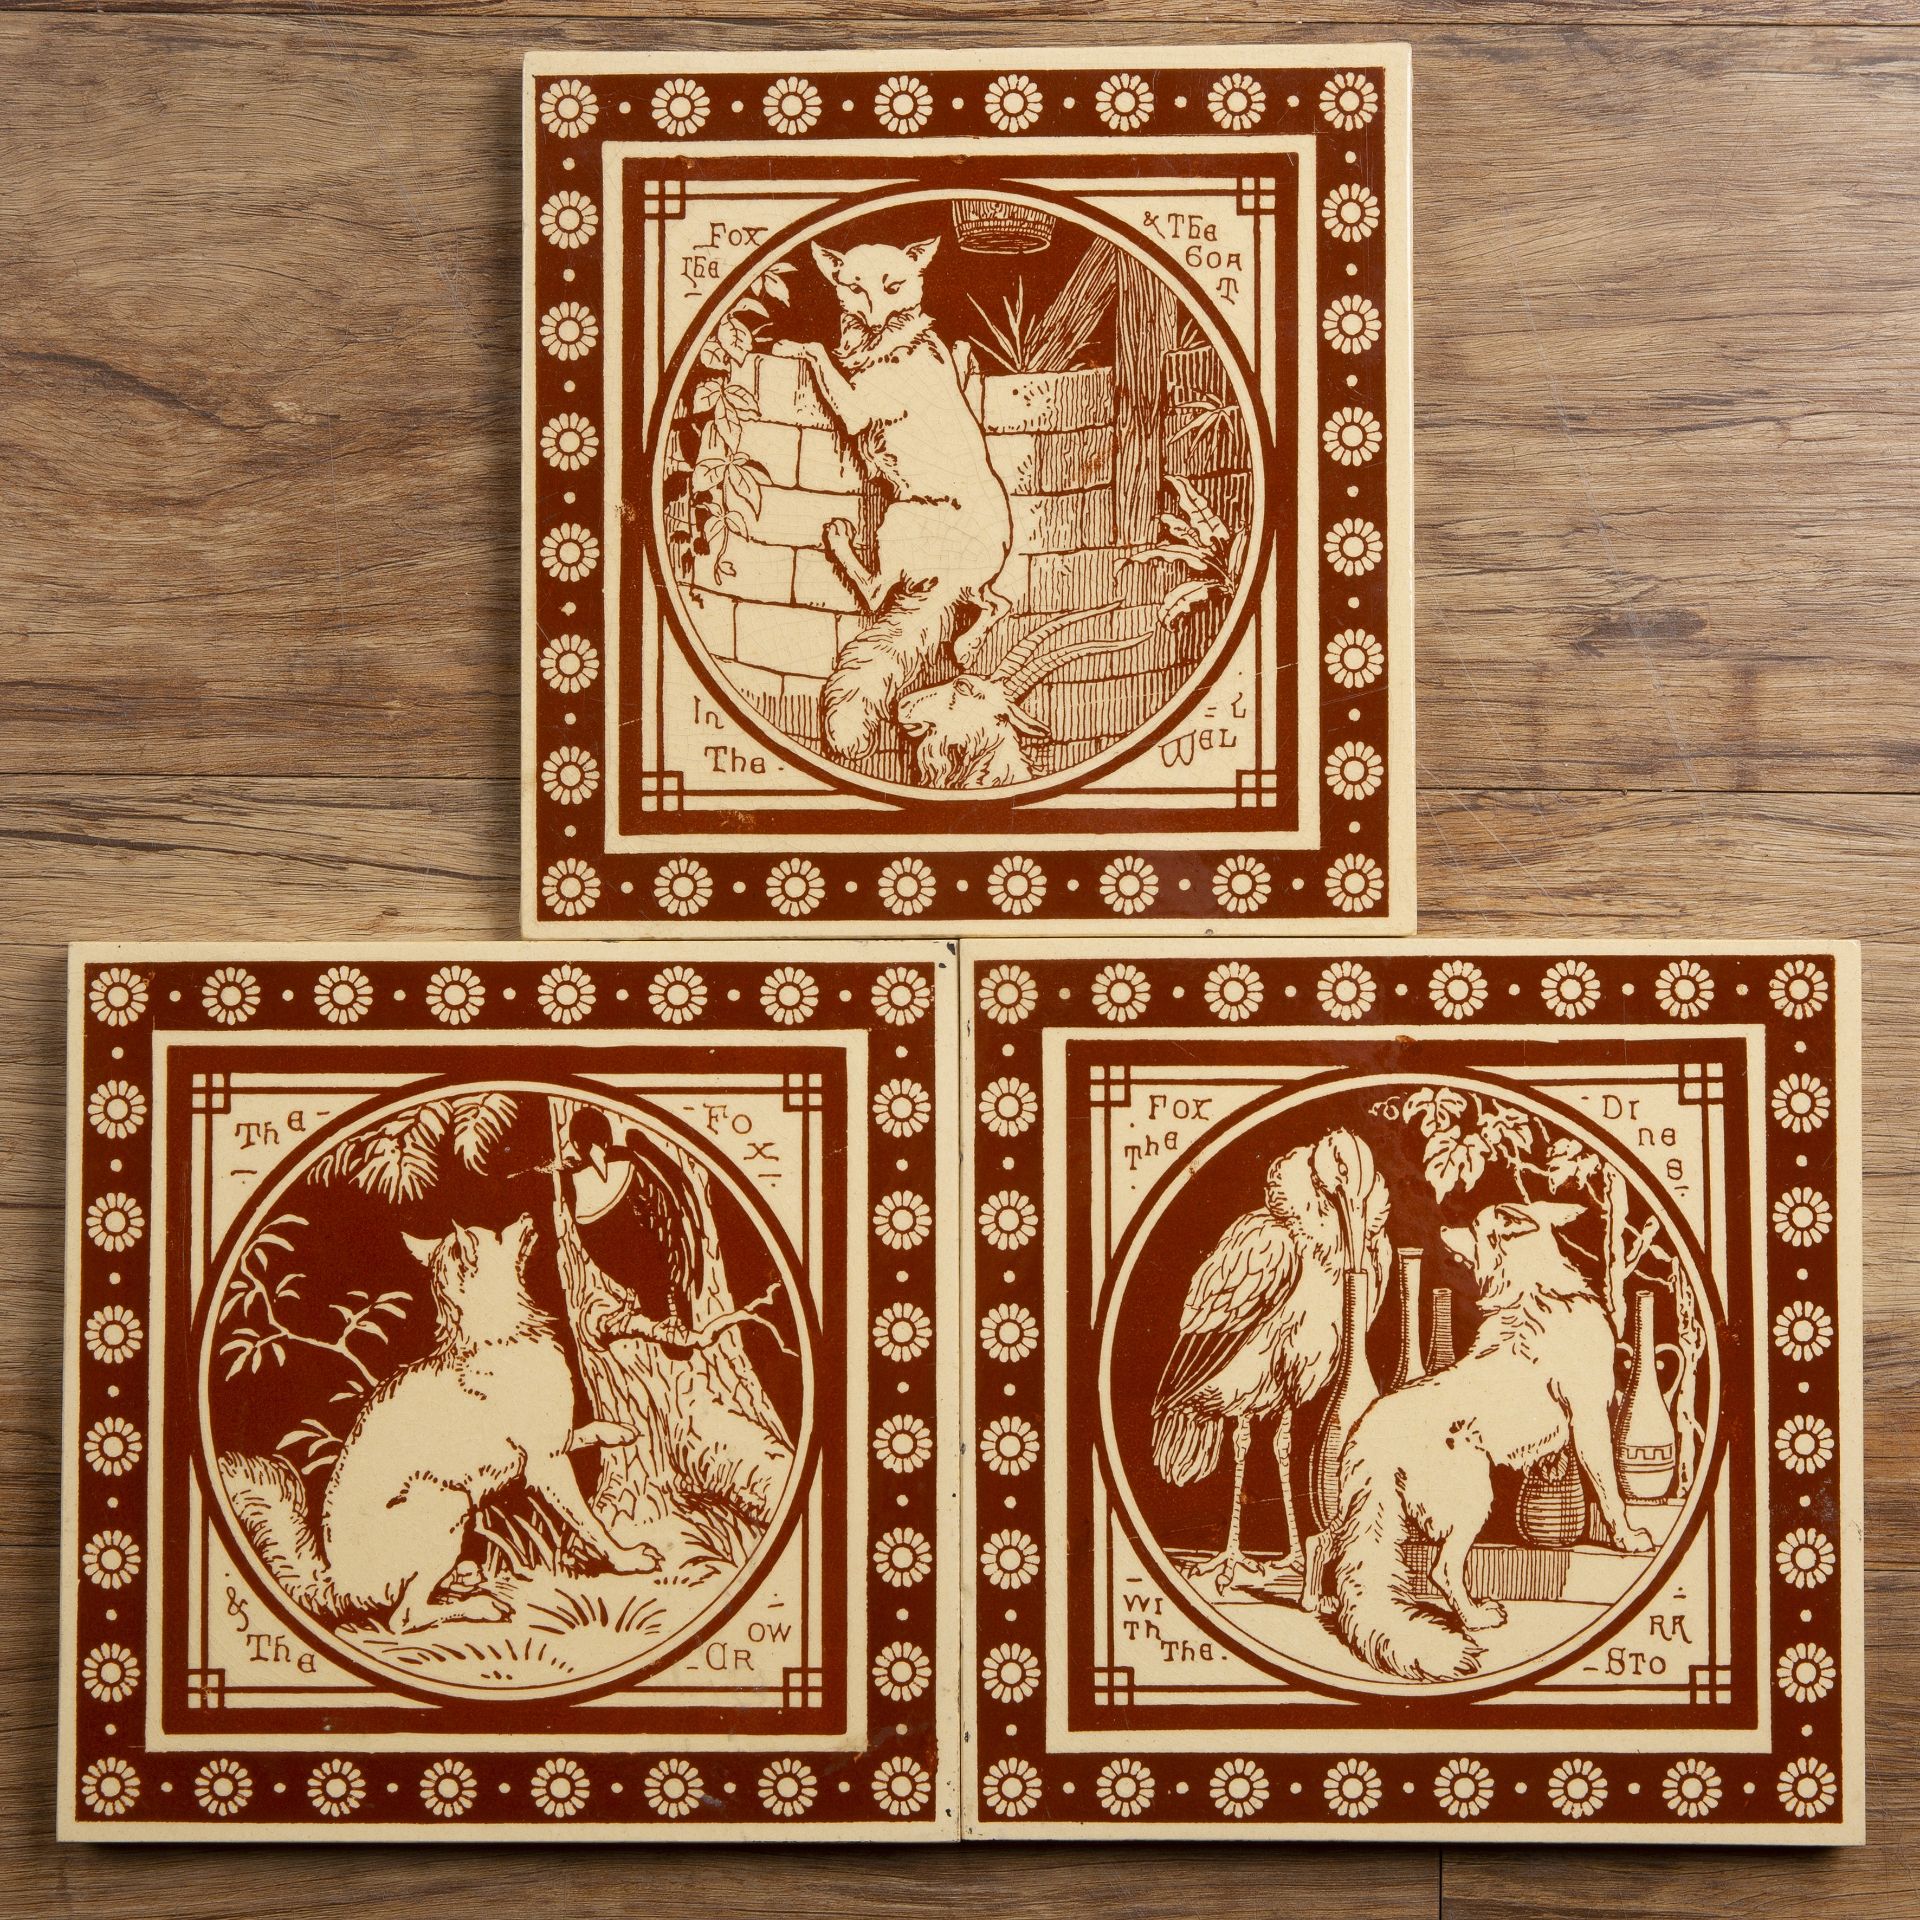 Three Mintons tiles from the 'Aesop's fables' series, the fox dines with the crow, the fox and the